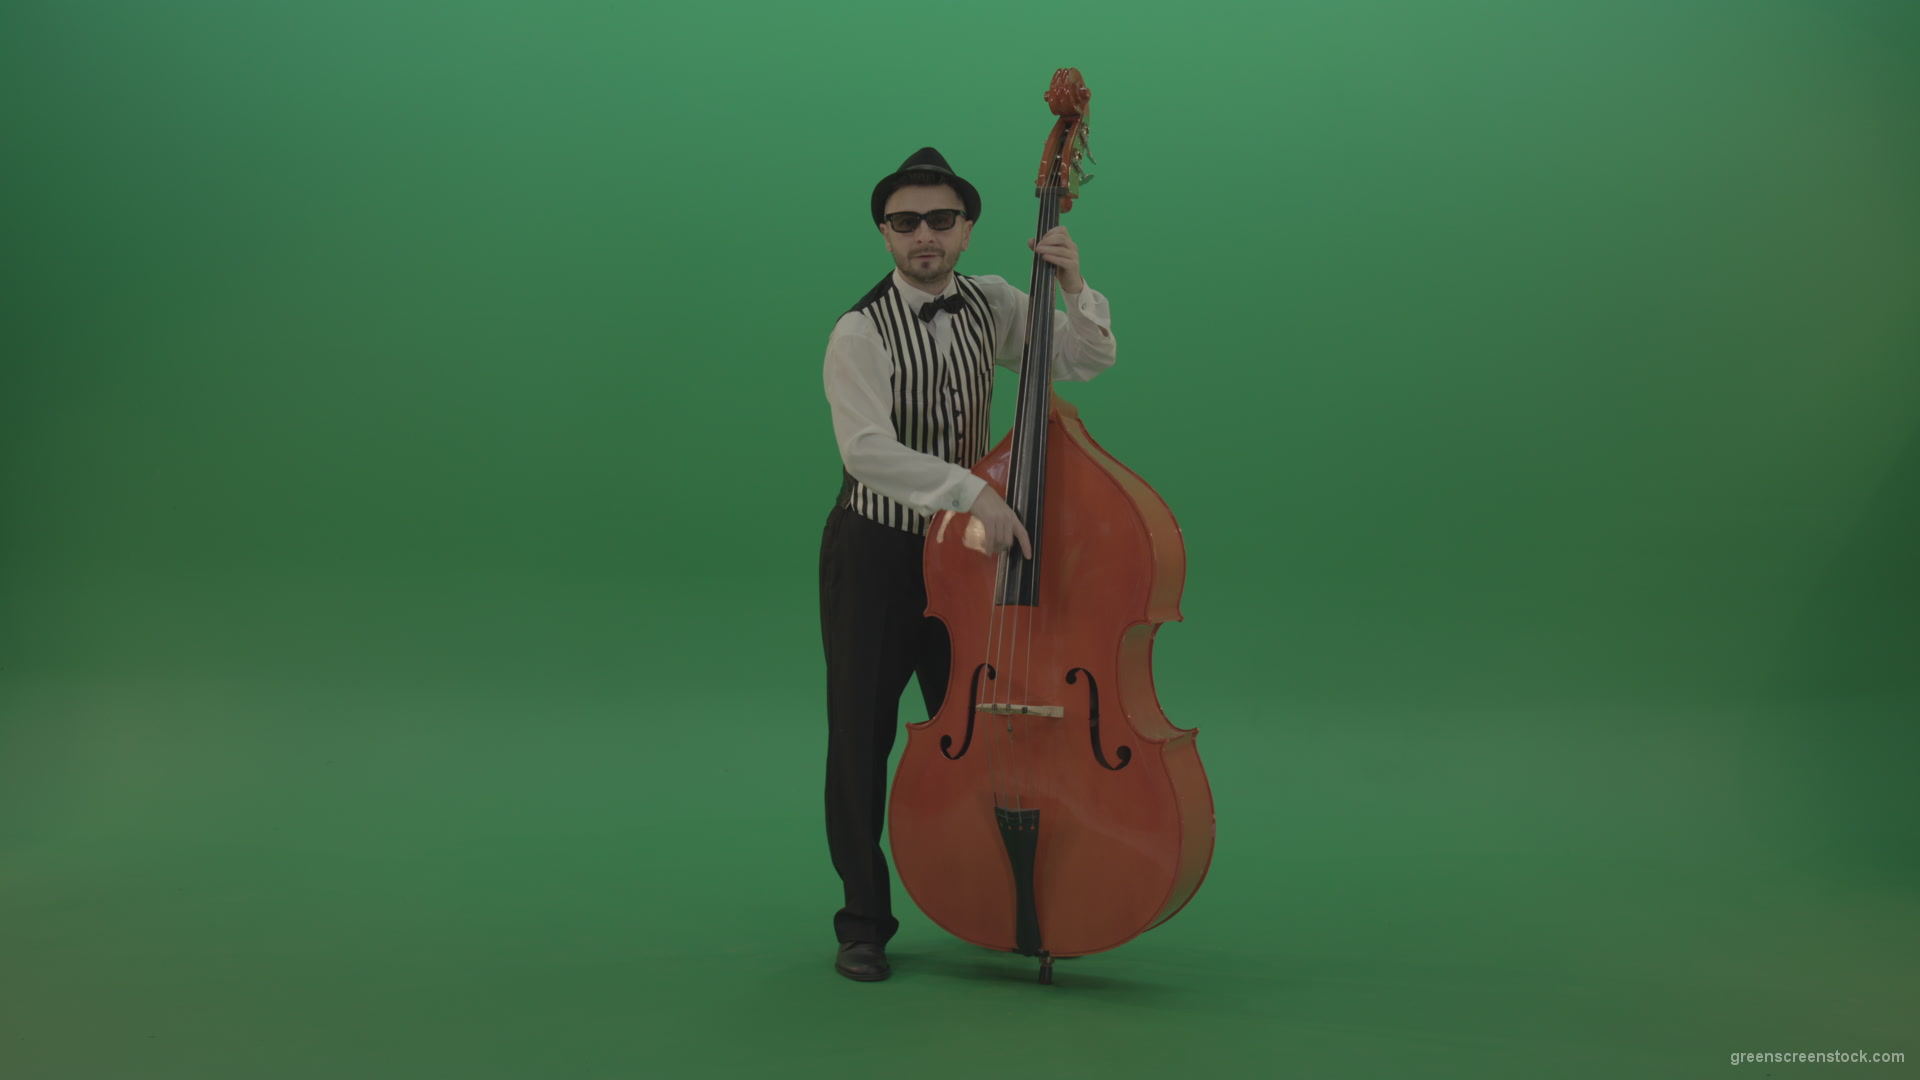 Full-size-man-play-jazz-on-double-bass-String-music-instrument-isolated-on-green-screen_002 Green Screen Stock